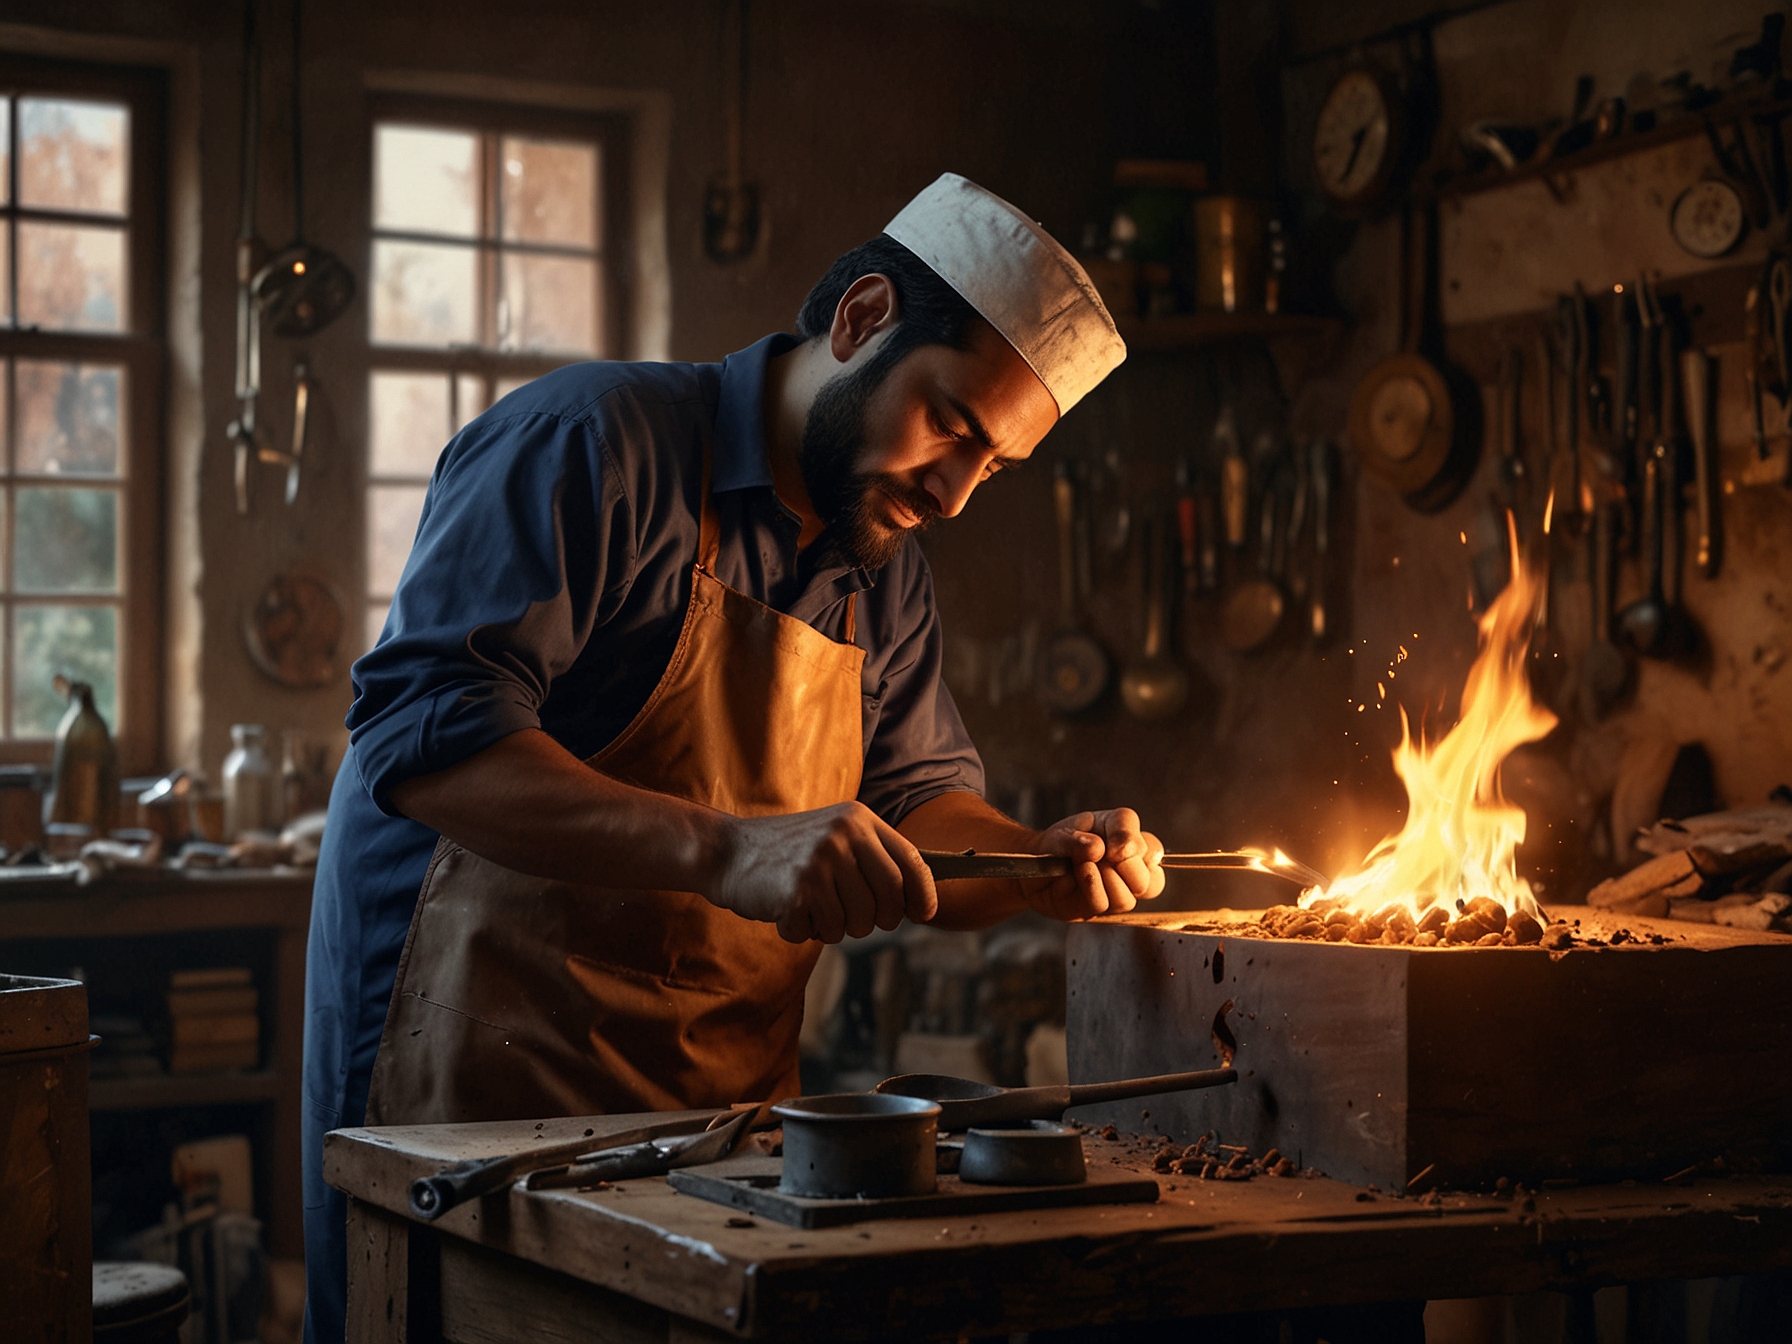 Ahmad Bakhsh, with focused dedication, uses a blowtorch to meticulously heat a copper utensil, preparing it for the tin-coating process in his workshop filled with tools and metallic artifacts.